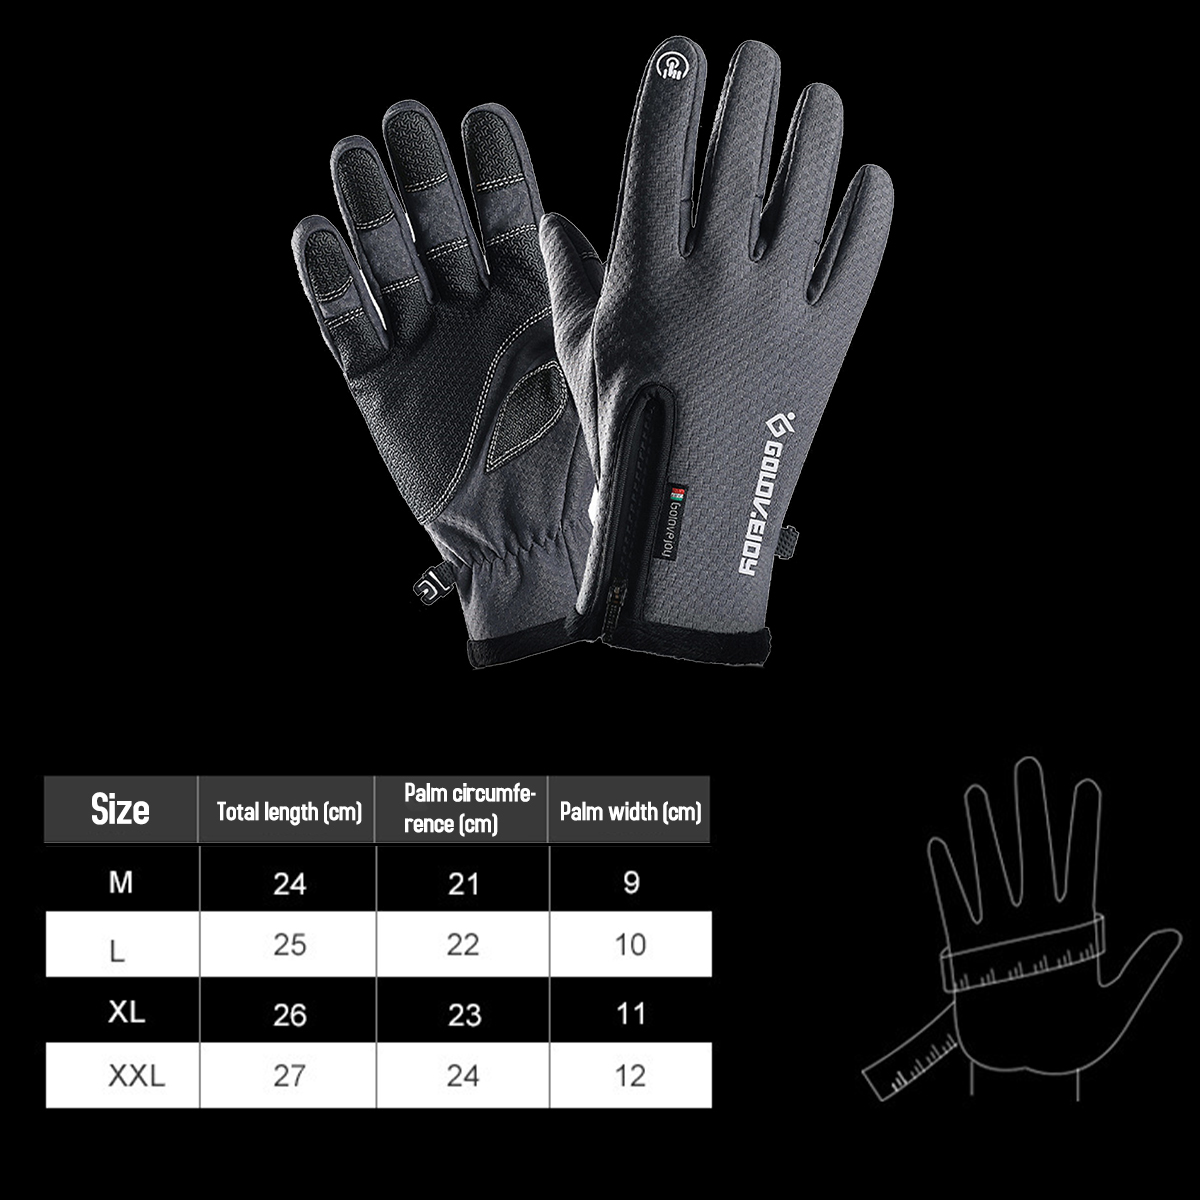 Windstopers-Skiing-Gloves-Anti-Slip-Touchscreen-Breathable-Water-Repellent-Zipper-Warm-Glove-1580293-8